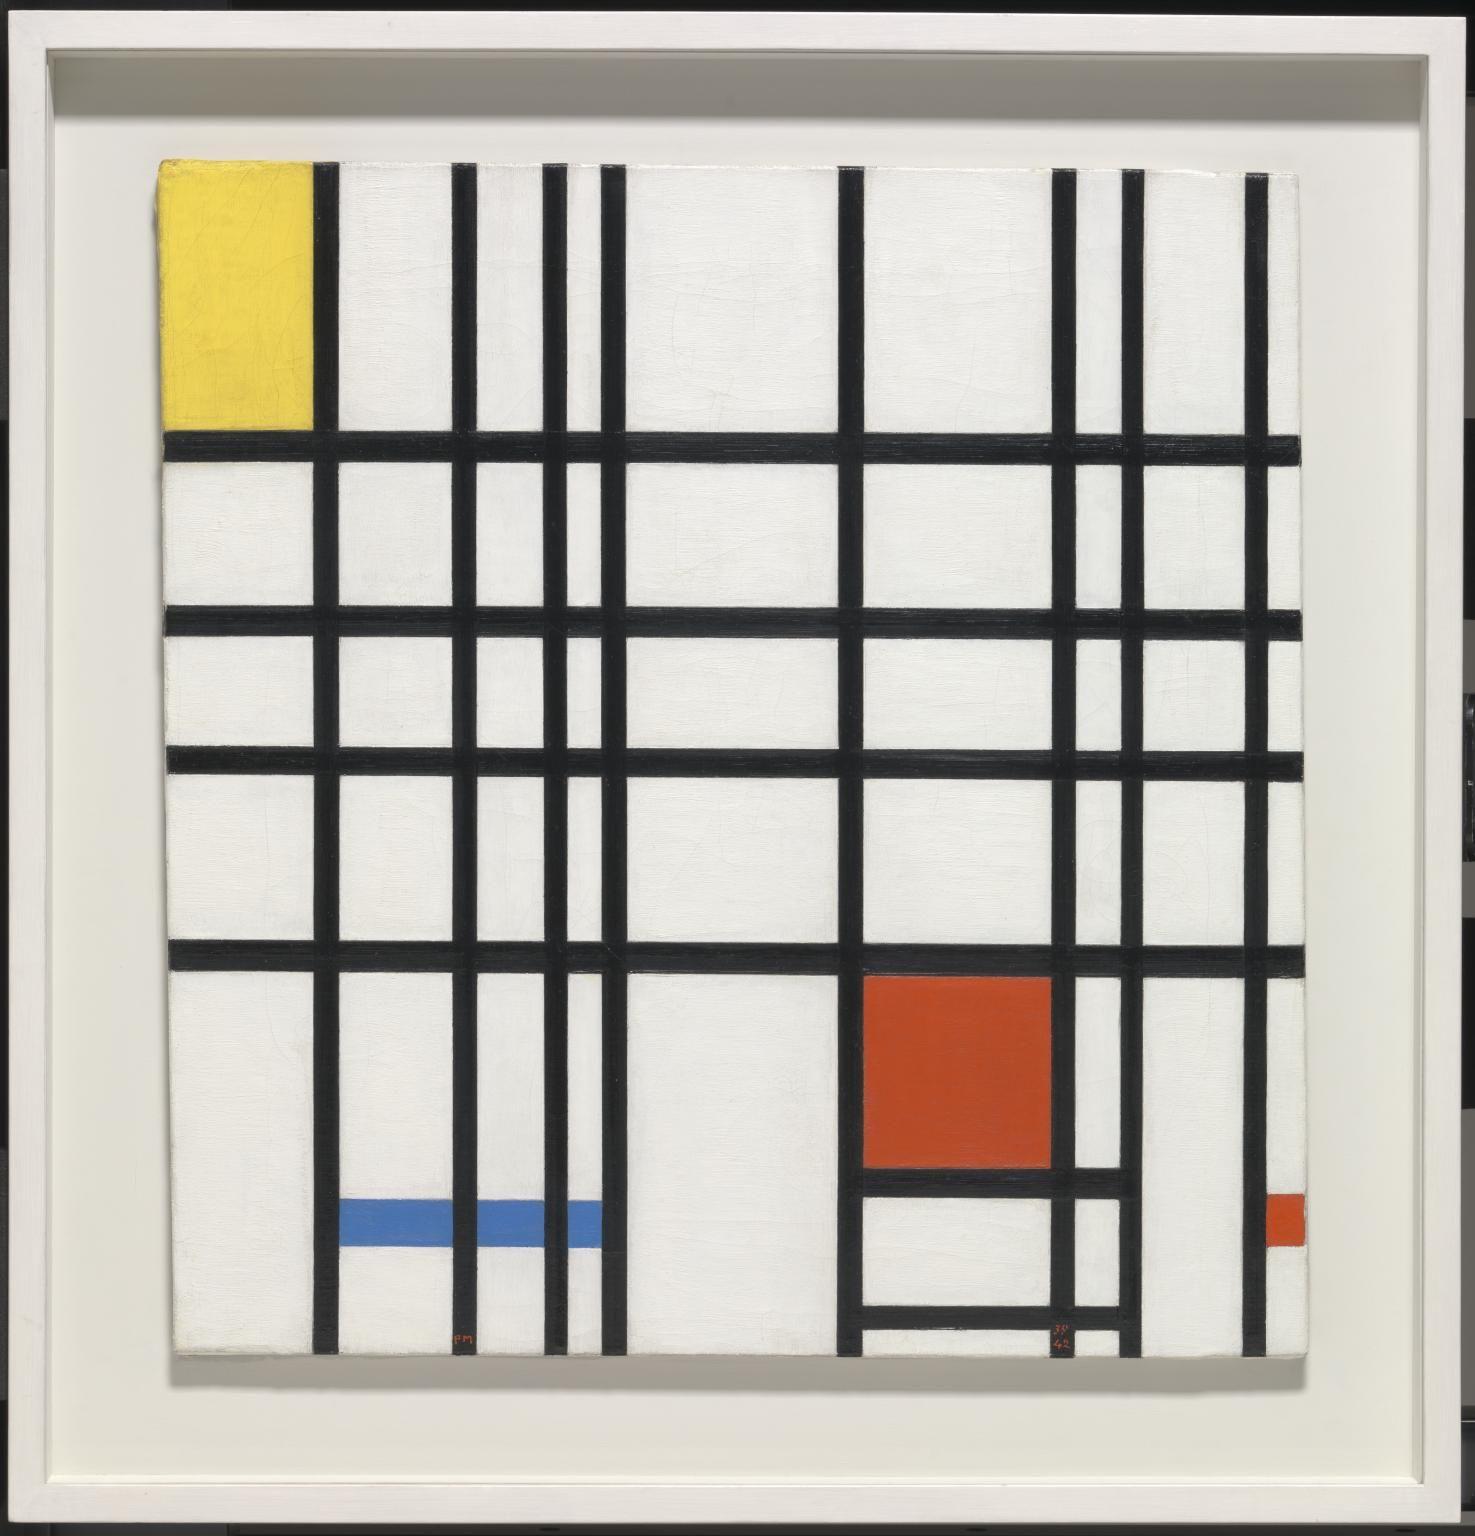 Blue and Yellow Square Logo - Composition with Yellow, Blue and Red', Piet Mondrian, 1937-42 | Tate